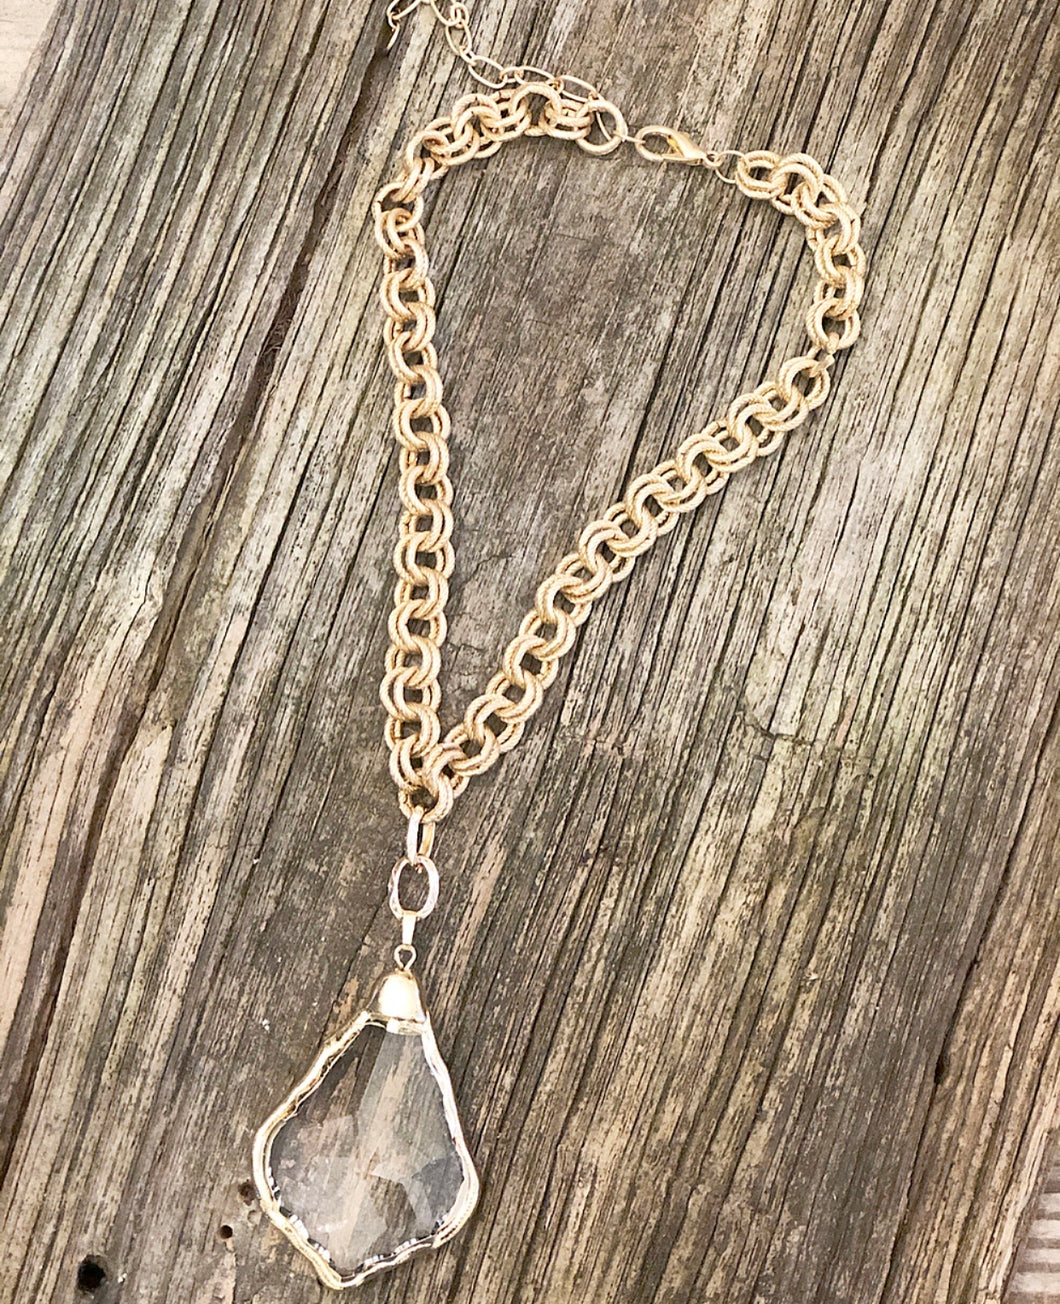 Antique Gold Crystal Pendant Necklace